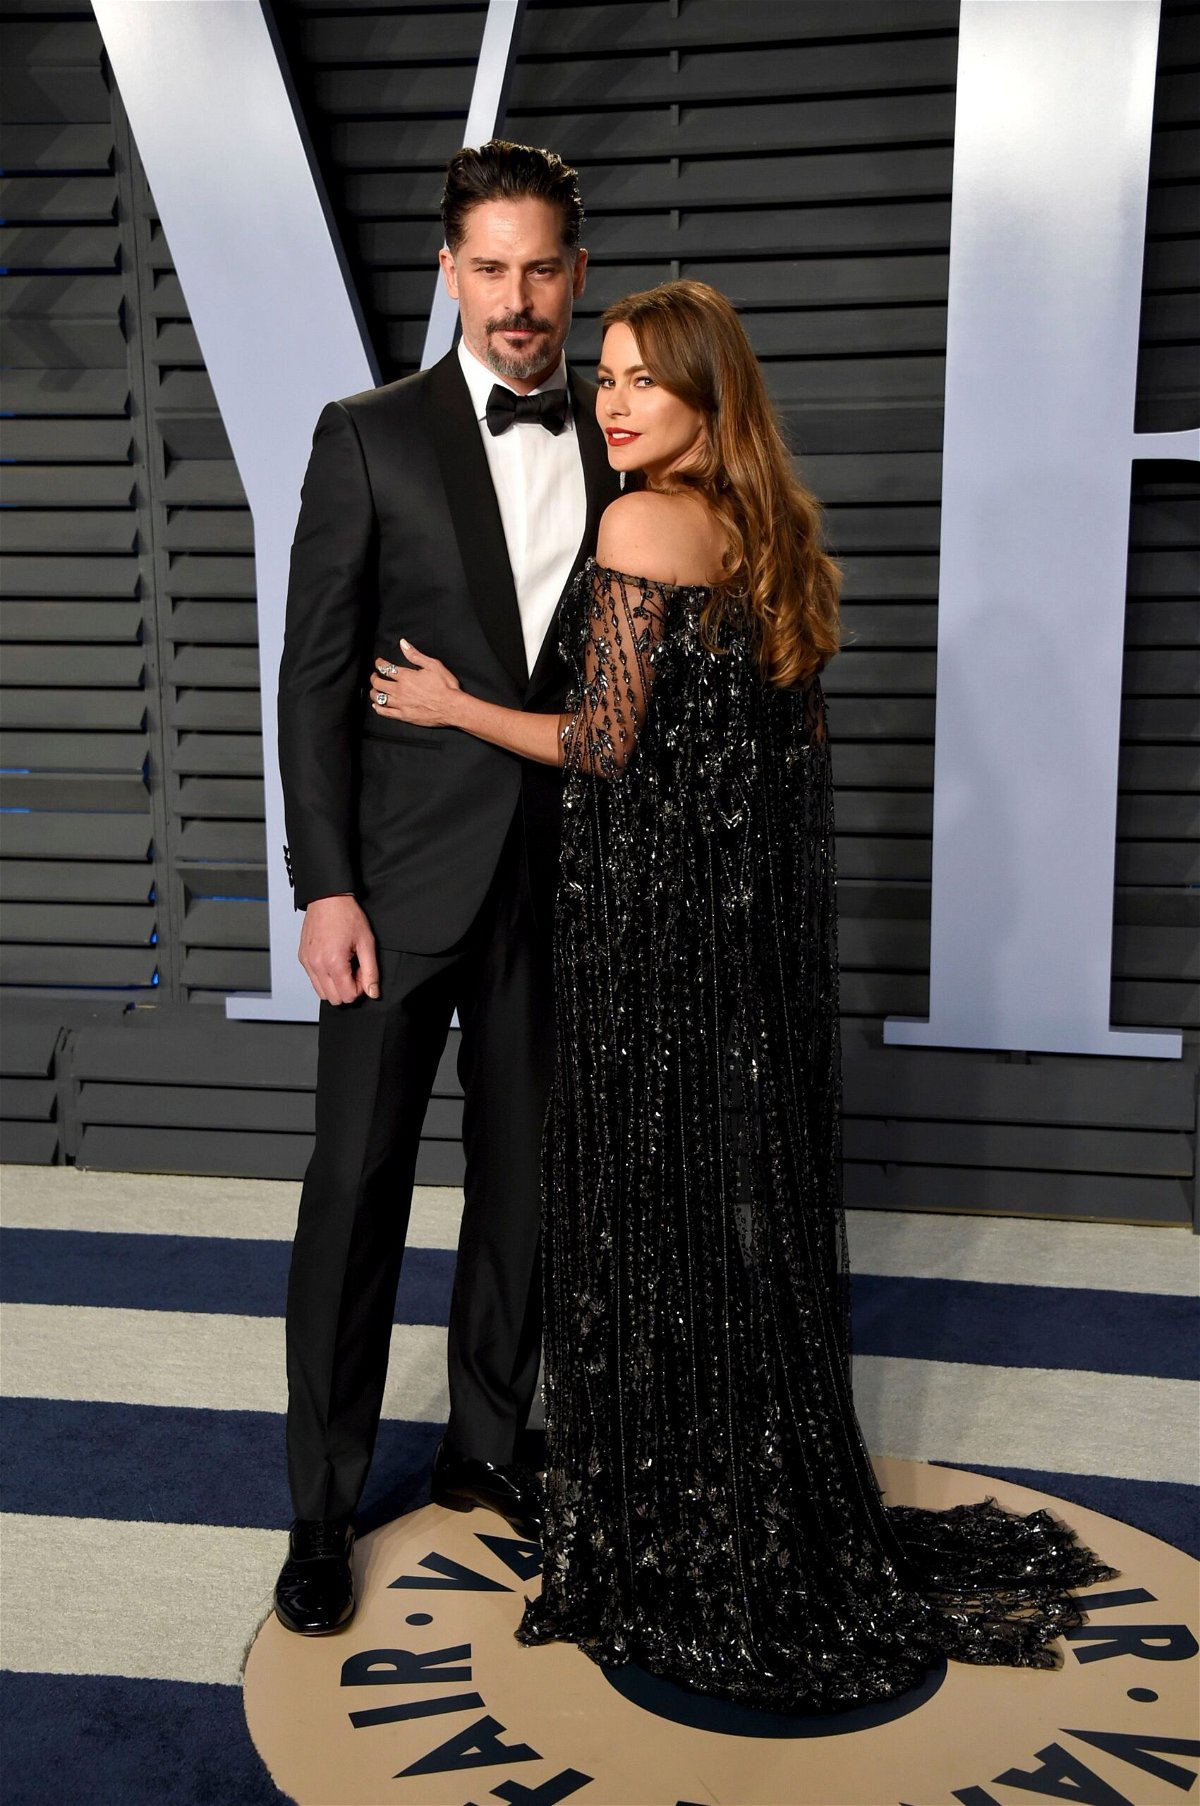 <i>Evan Agostini/Invision/Evan Agostini/Invision/AP</i><br/>Joe Manganiello and Sofia Vergara arrive at the Vanity Fair Oscar Party in 2018. Sofía Vergara and Joe Manganiello’s marriage of nearly eight years is officially ending. The couple shared the news in a statement to PageSix